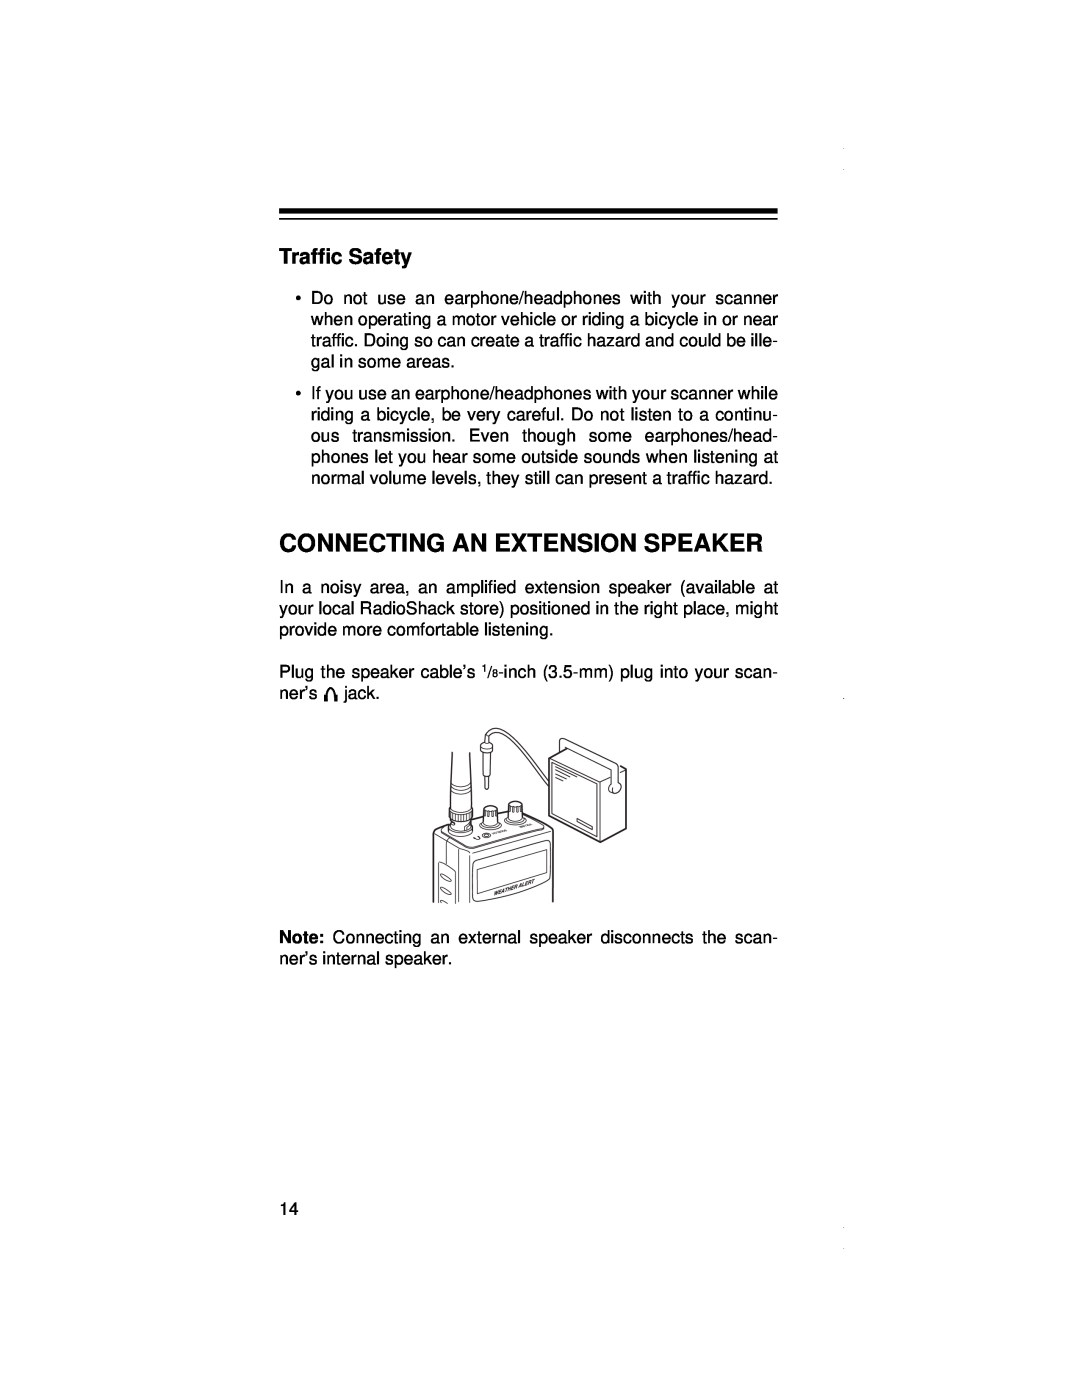 Radio Shack PRO-79 owner manual Connecting An Extension Speaker, Traffic Safety 